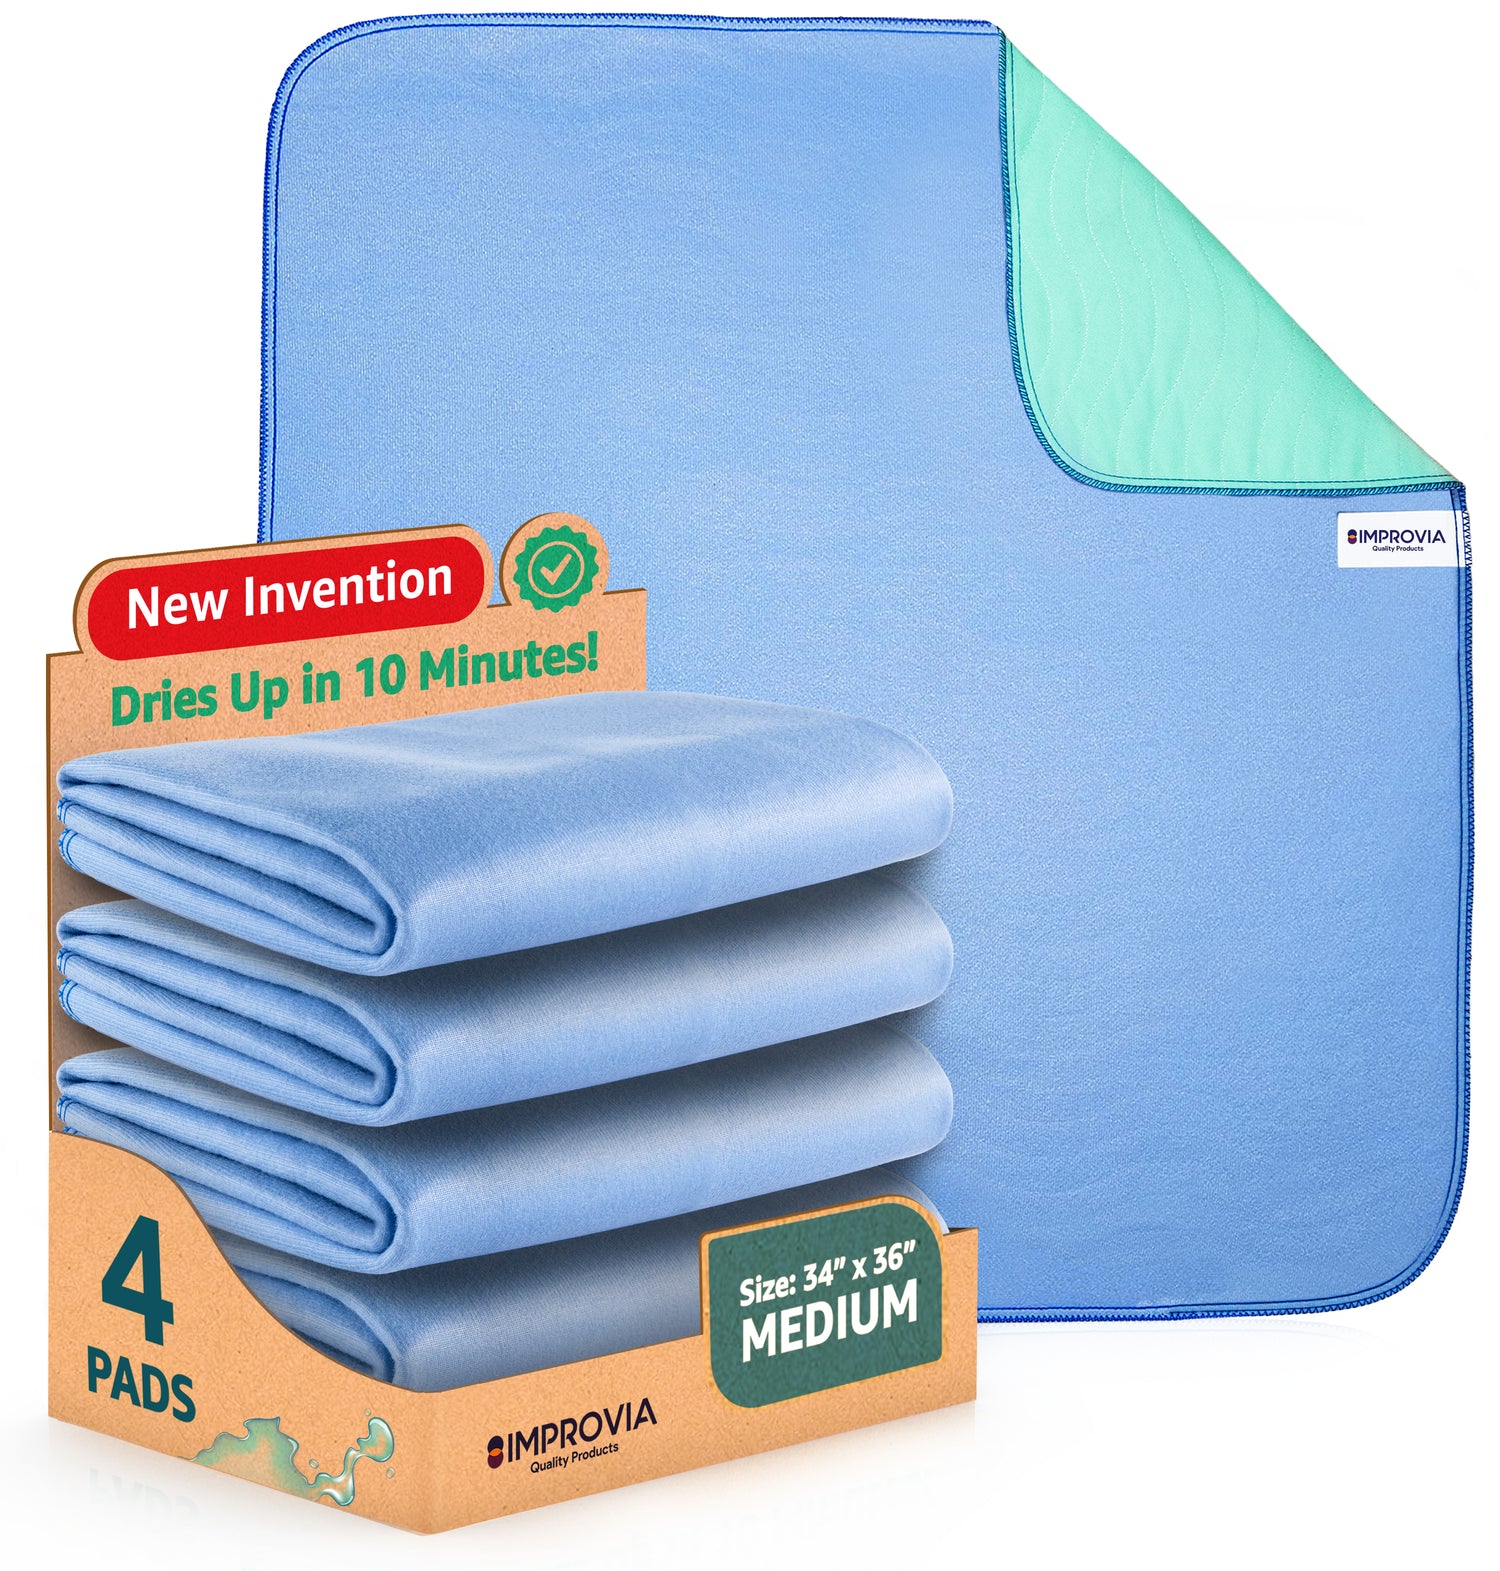 Improvia Washable Underpads, 34 x 36 (Pack of 4) - Heavy Absorbency Reusable Incontinence Pads for Kids, Adults, Elderly, and Pets - Waterproof